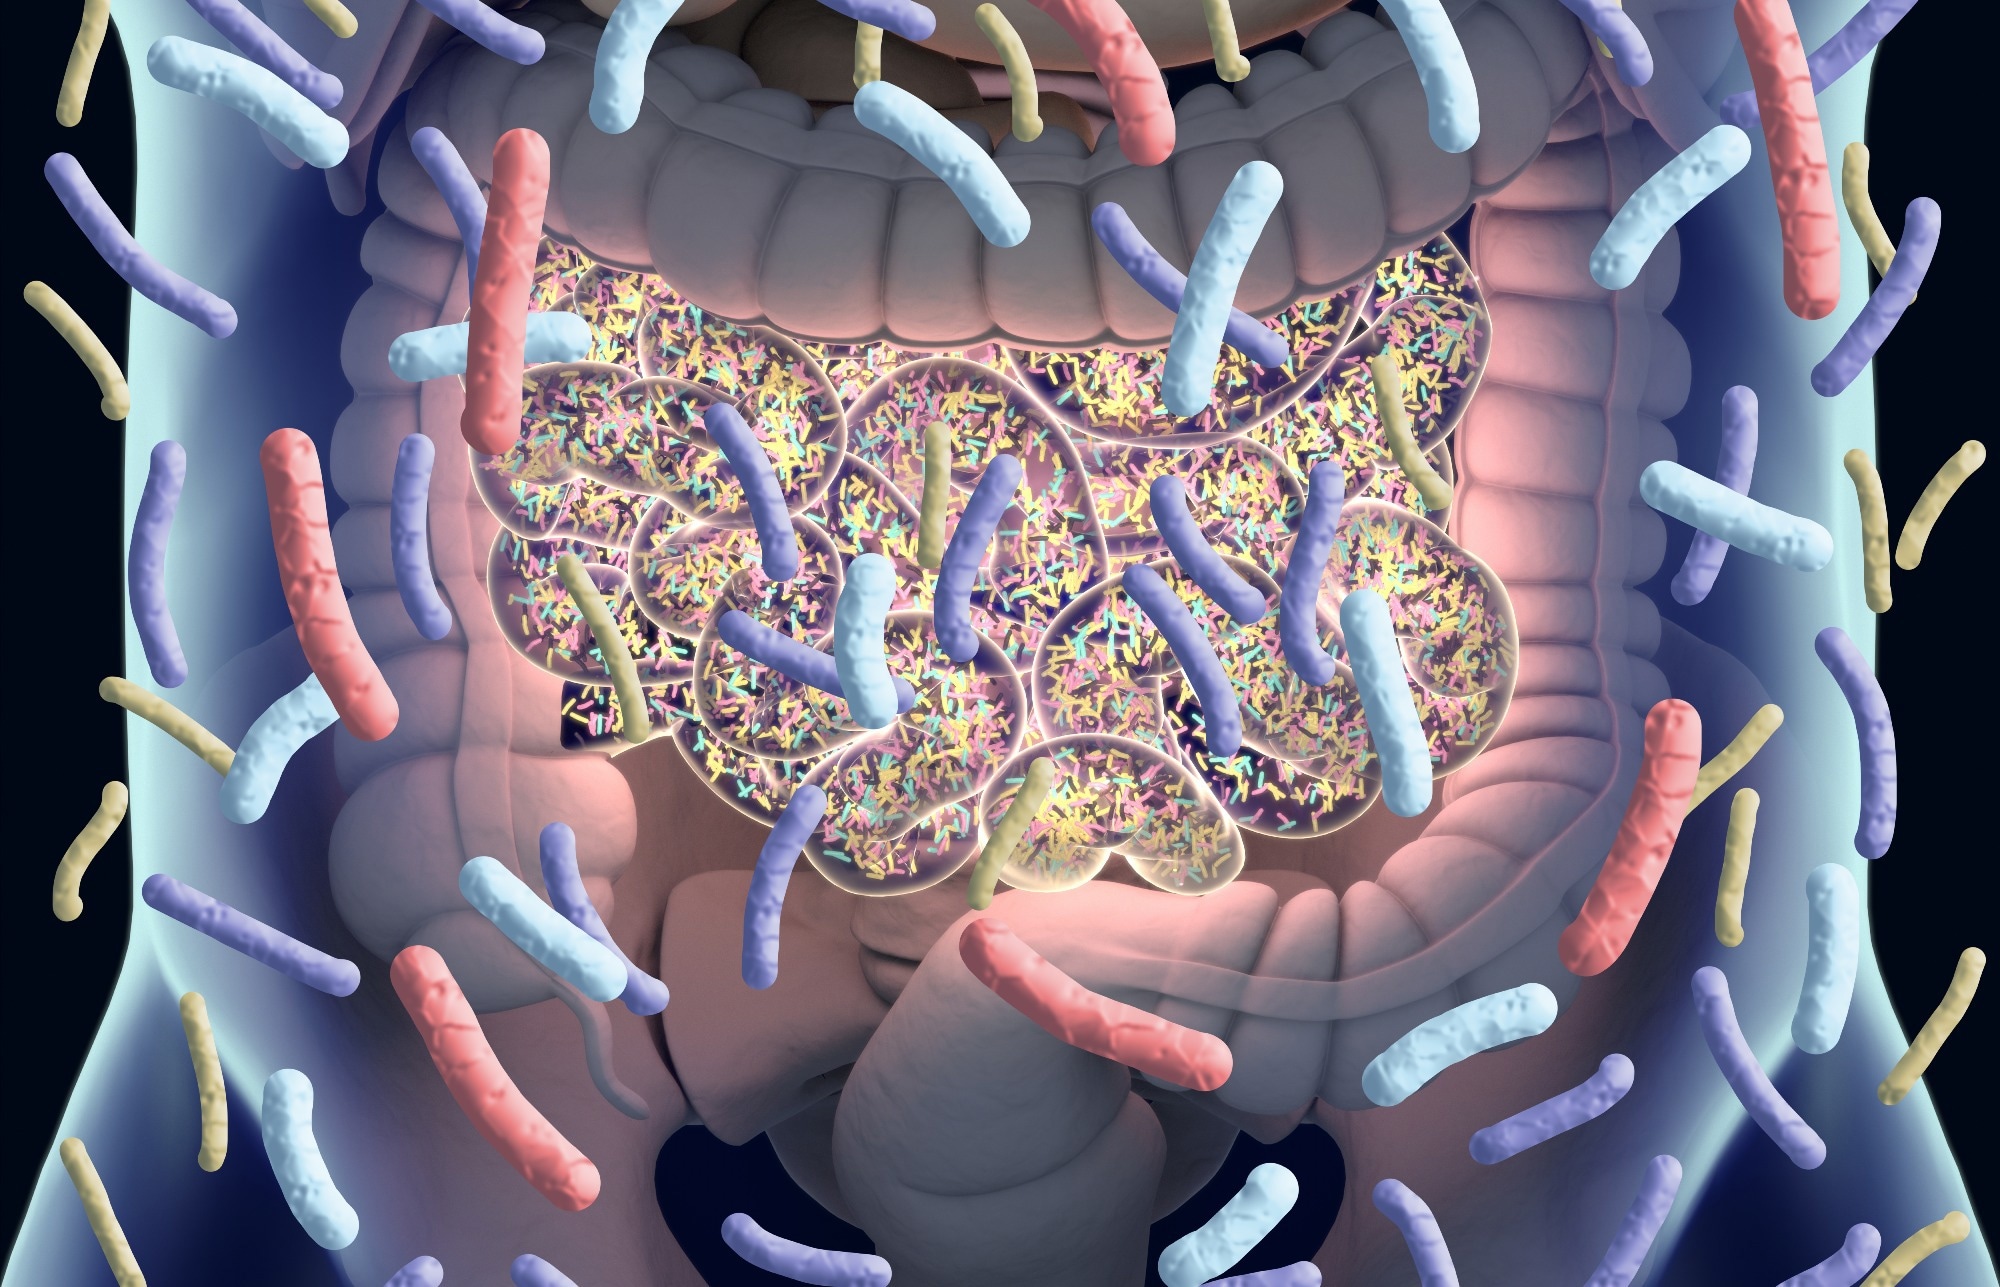 Study: Gut microbiome dysbiosis across early Parkinson’s disease, REM sleep behavior disorder and their first-degree relatives. Image Credit: Anatomy Image / Shutterstock